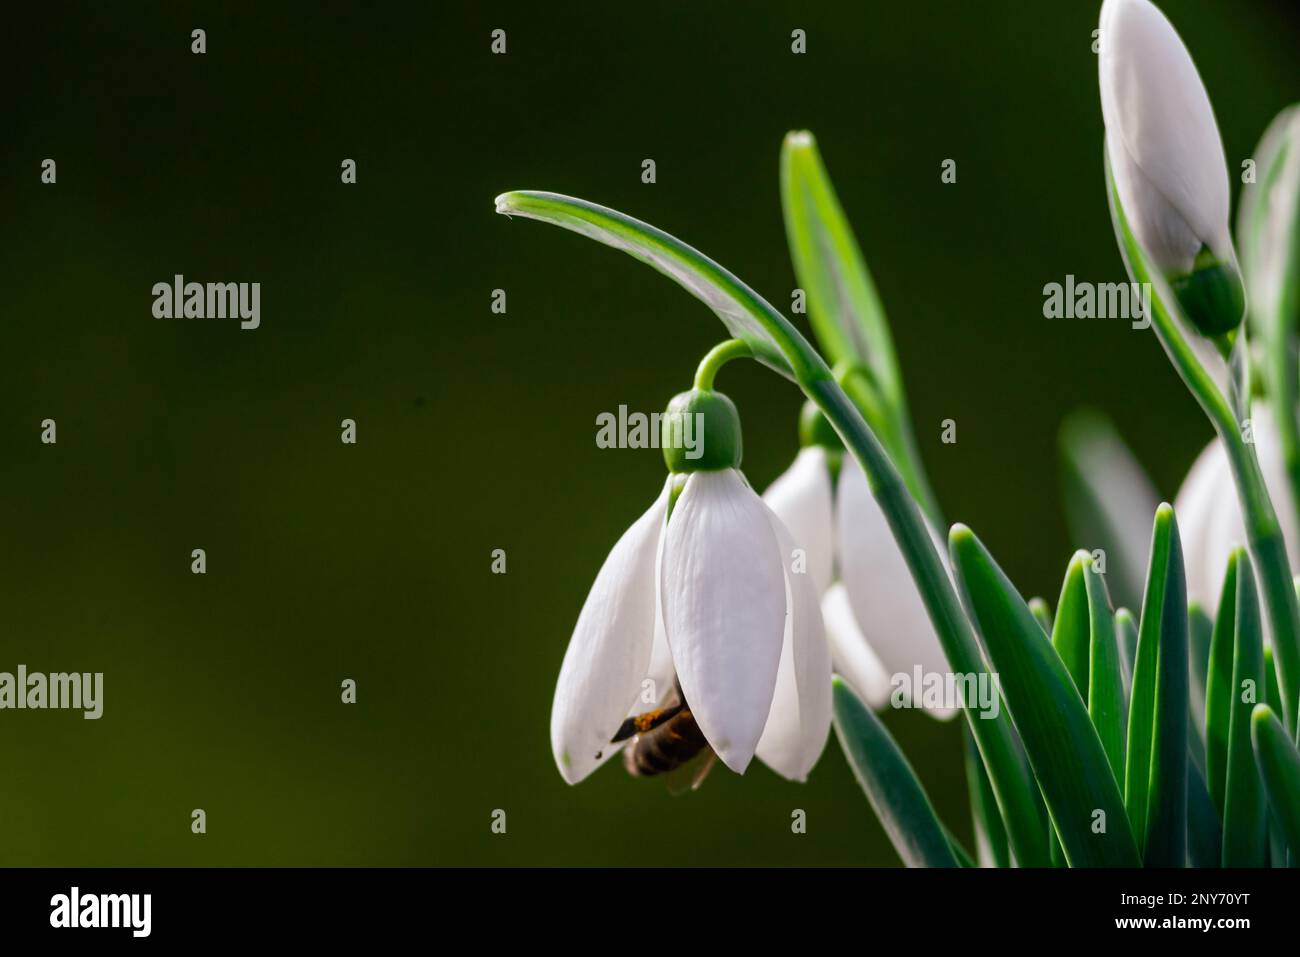 white snowdrop flowers Galanthus nivalis growth in snow. Beautiful spring natural green background. early spring season concept First flowers postcard Stock Photo